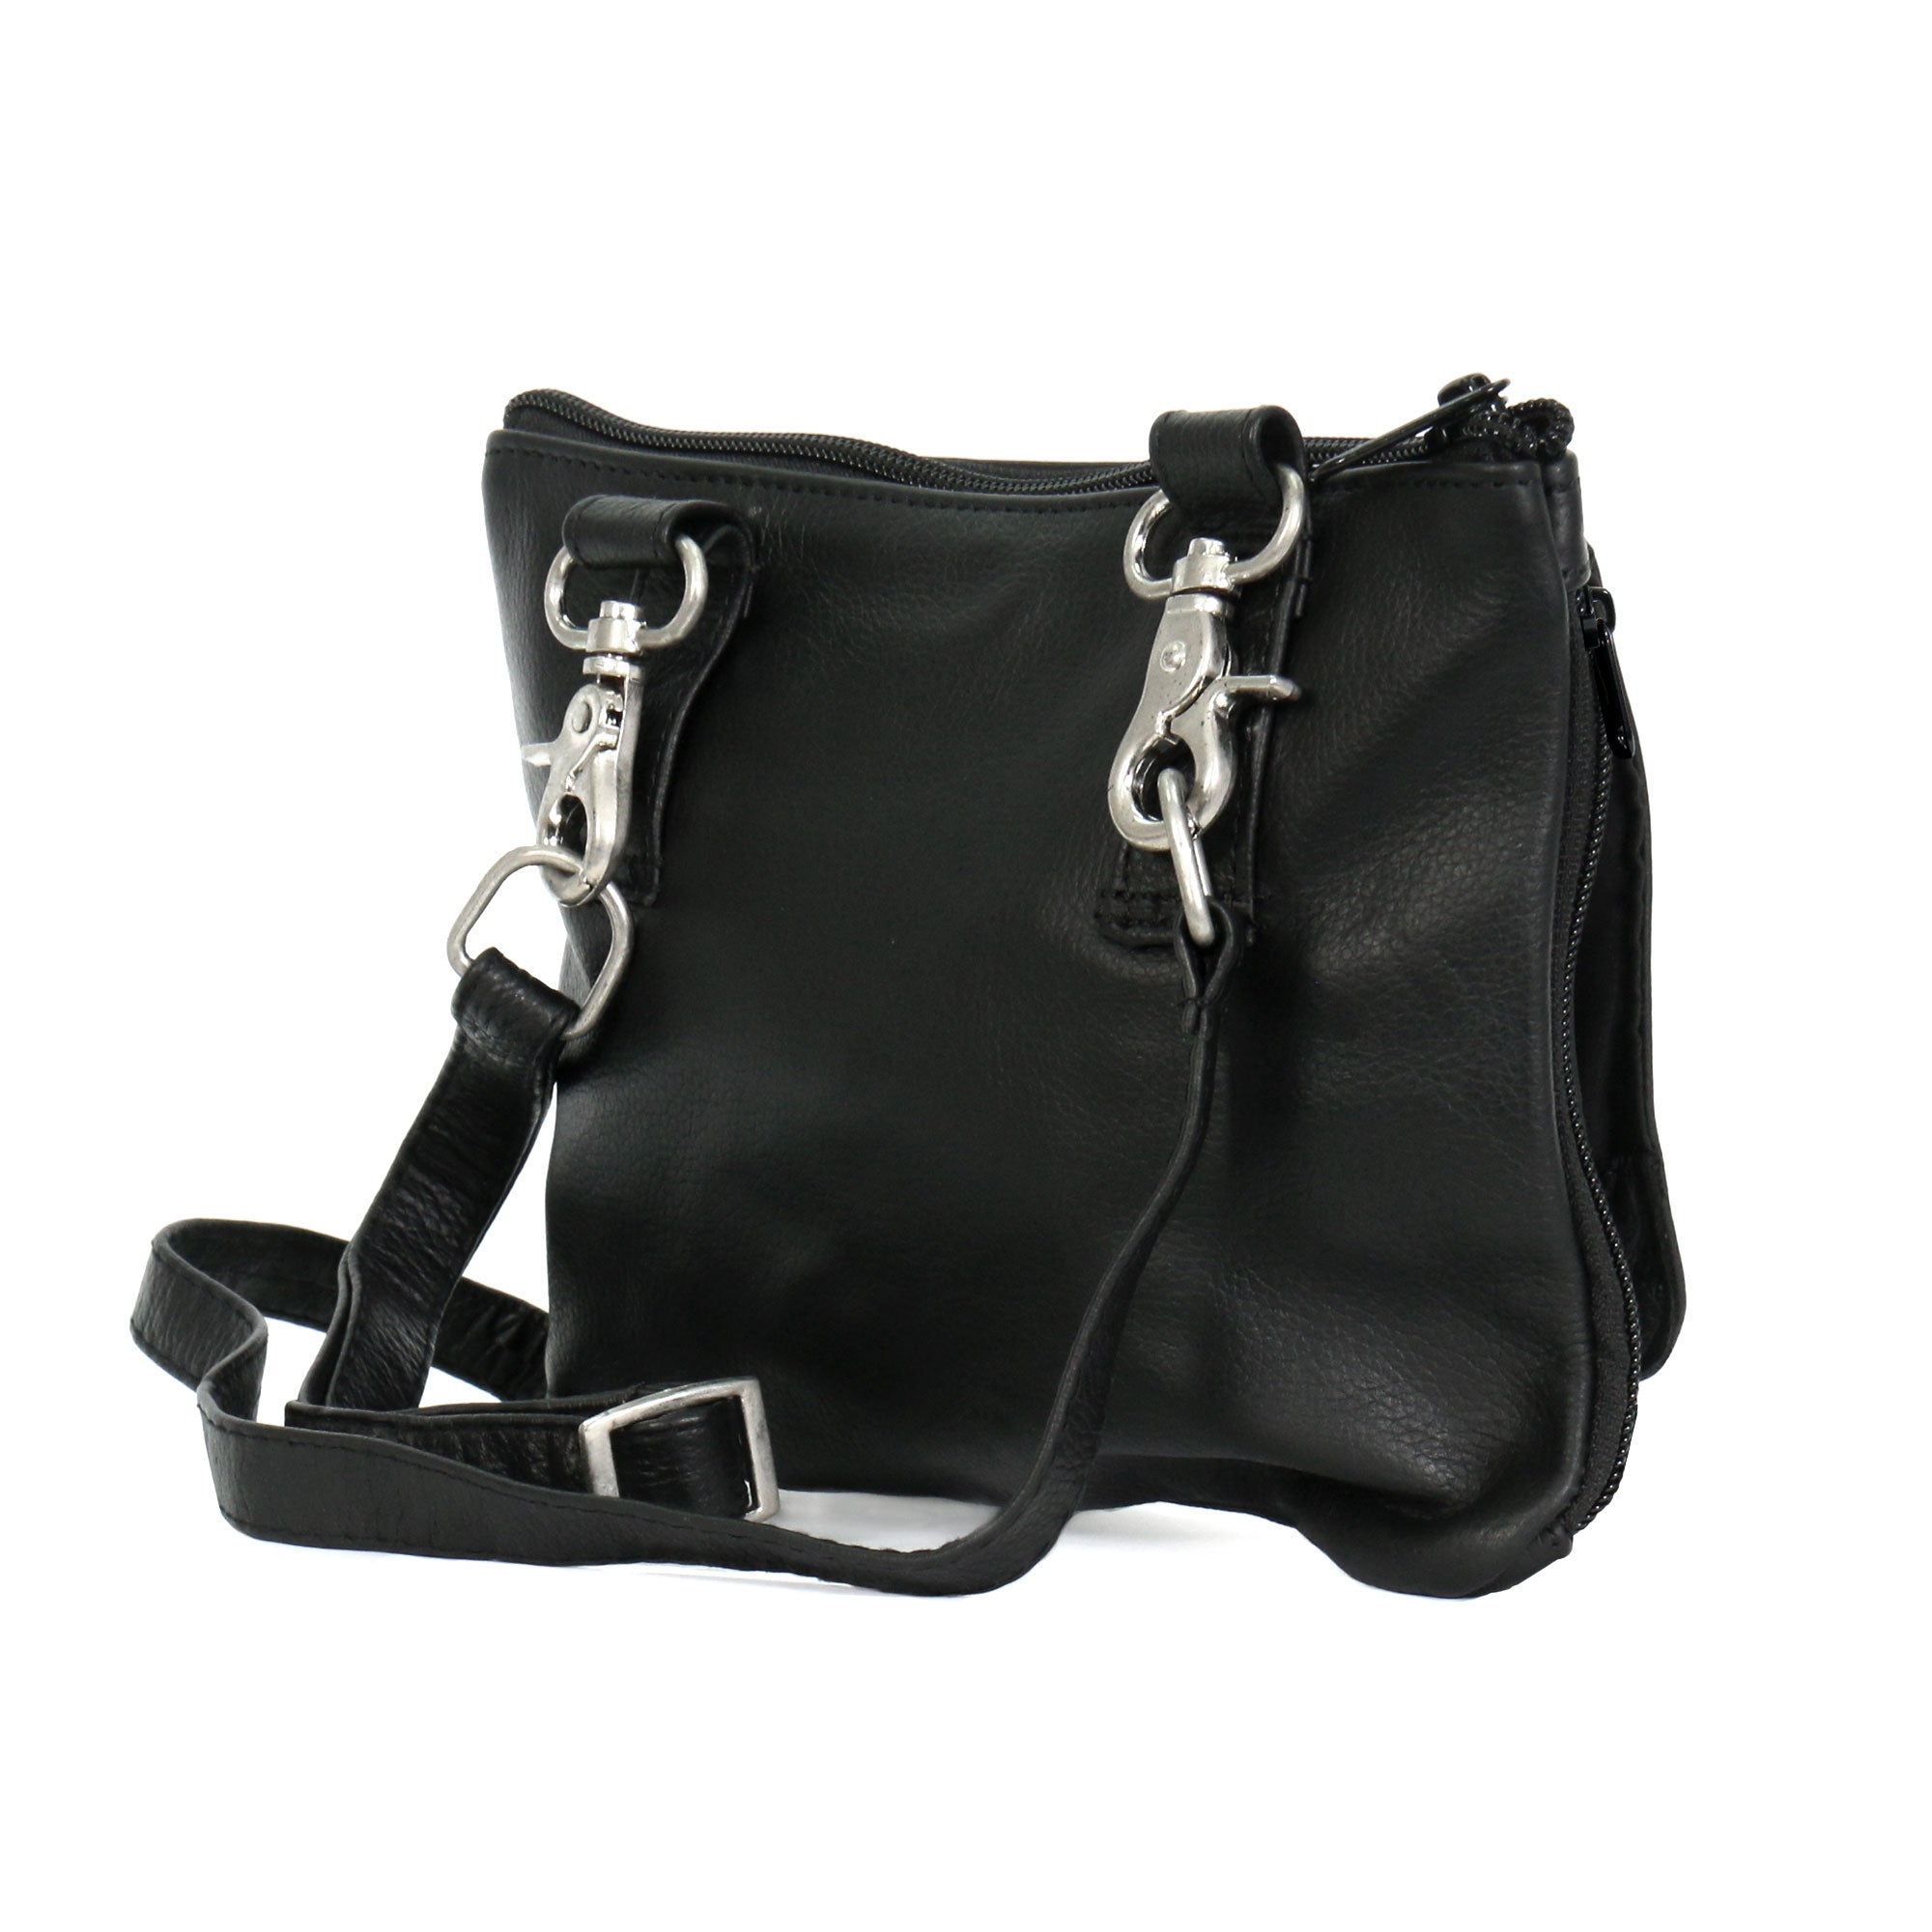 Hot Leathers Concealed Carry Leather Purse